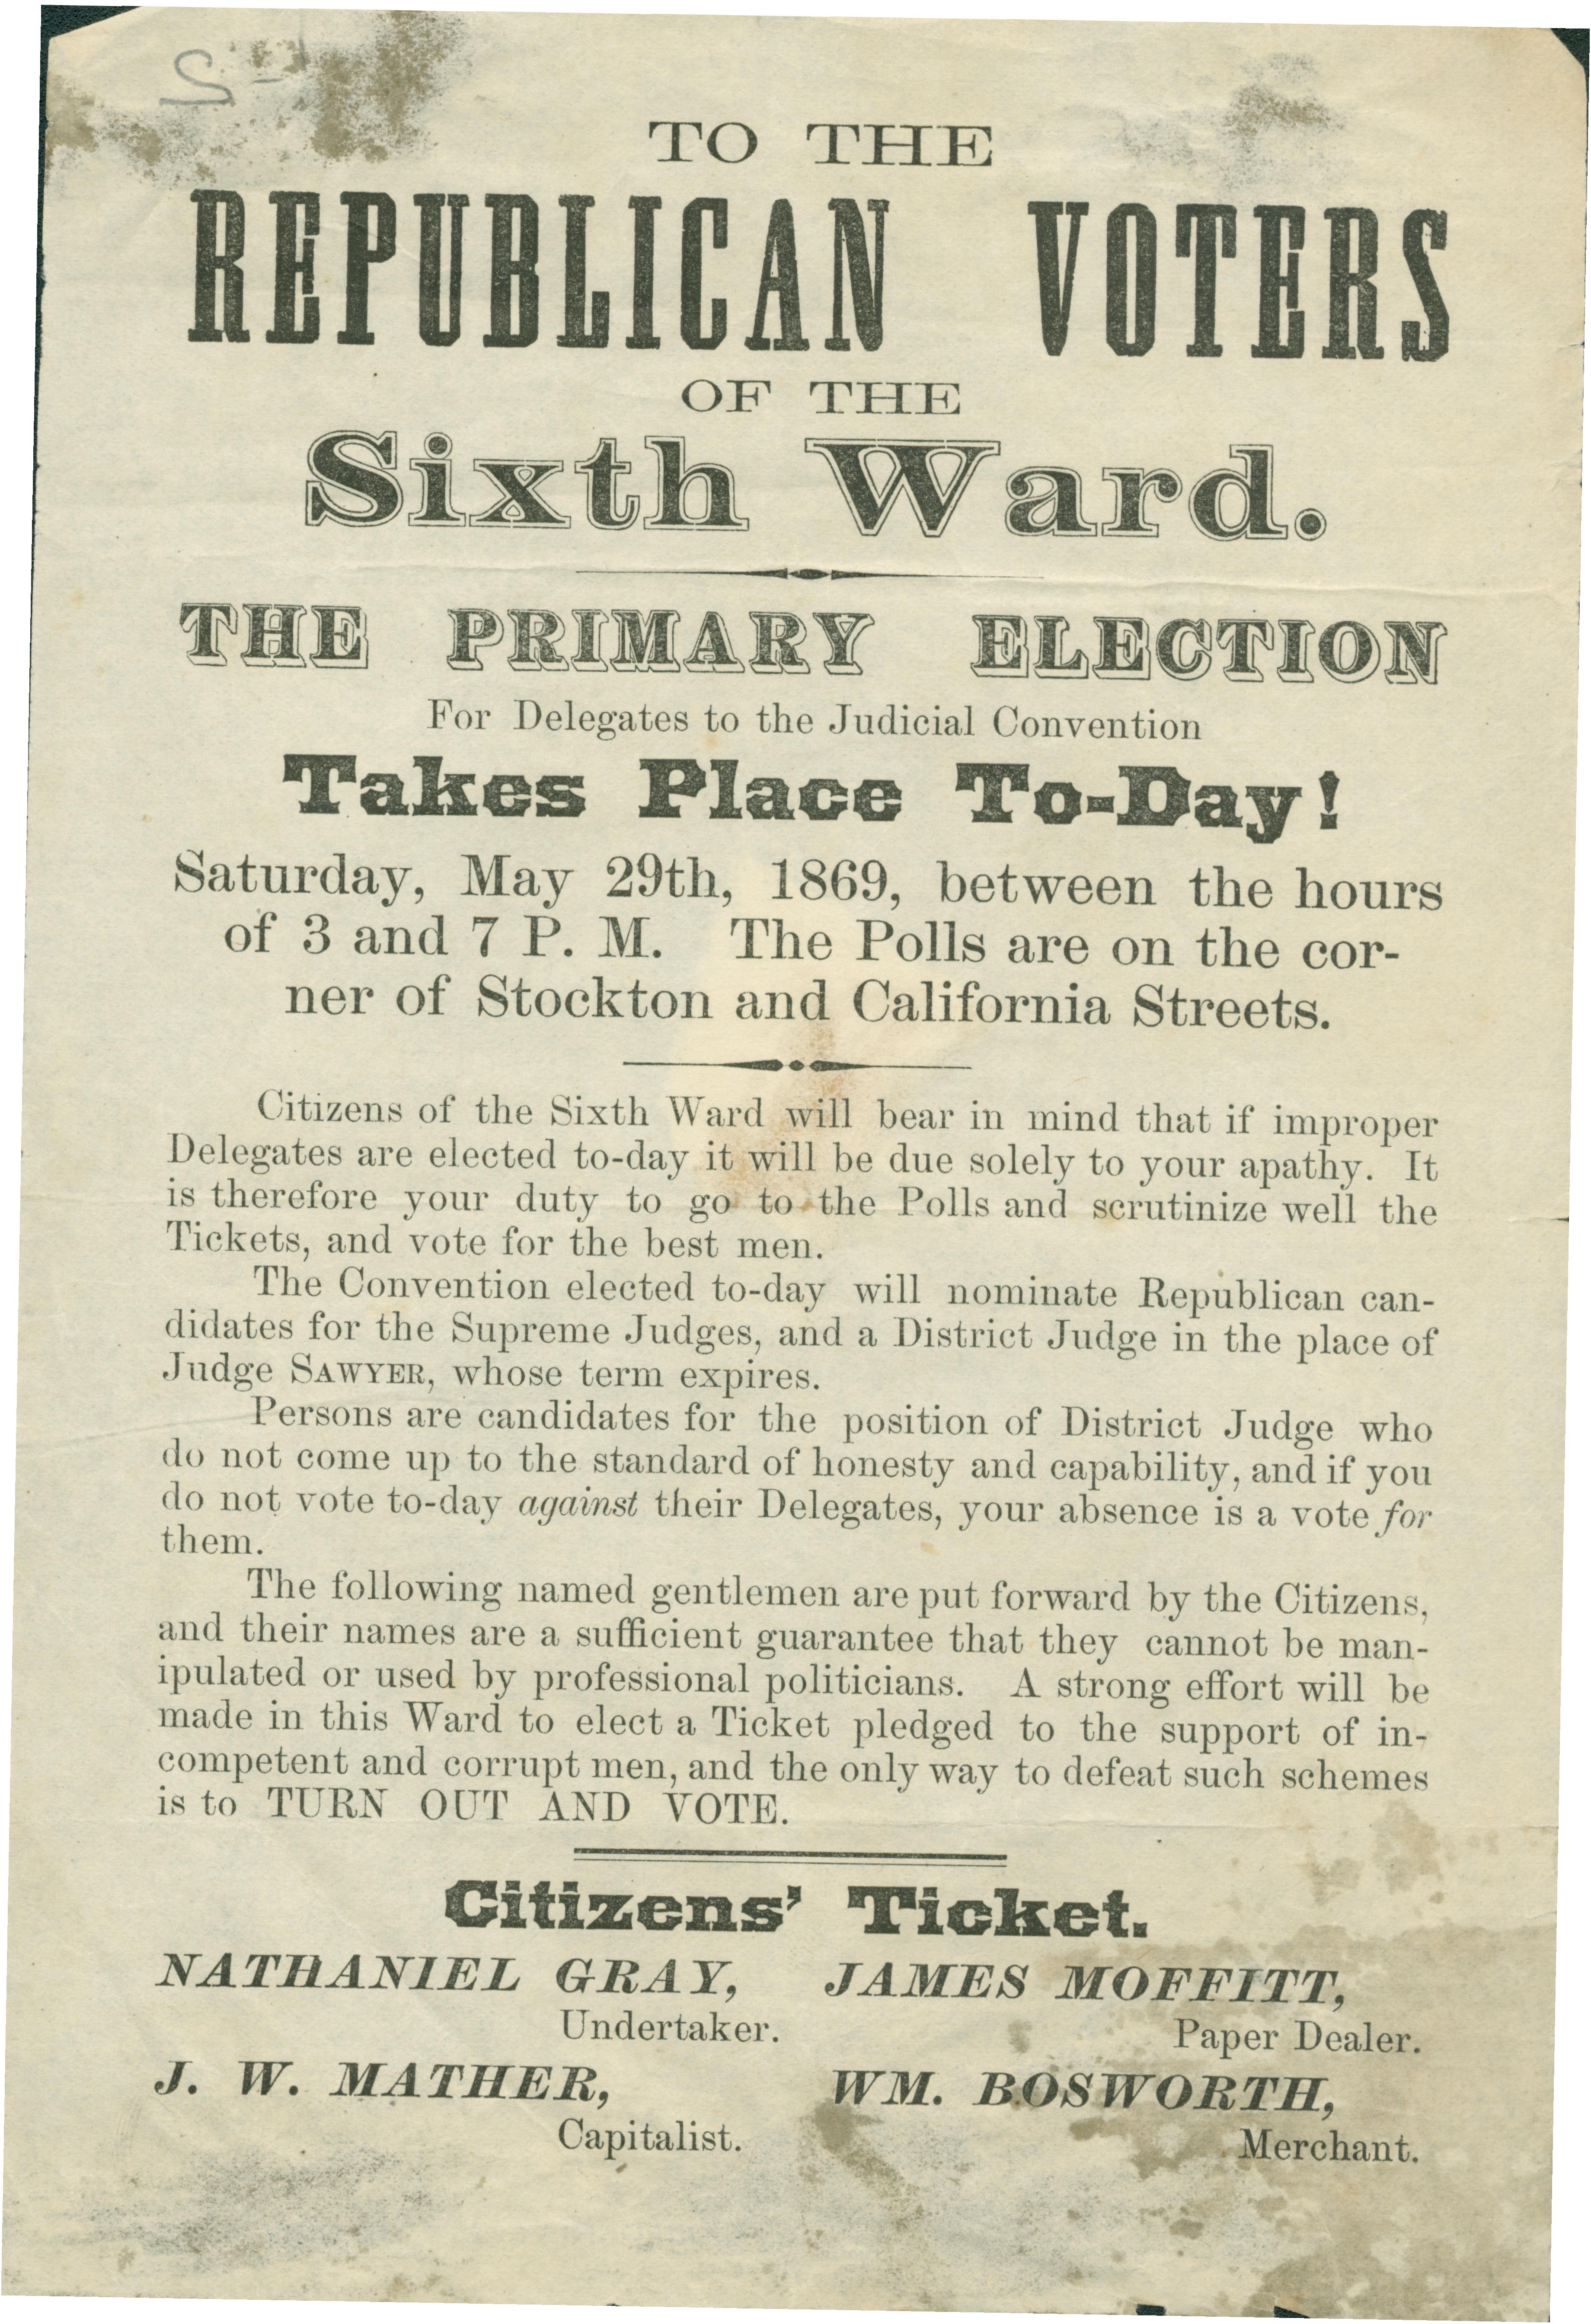 This is a flier from 1869 that exhorts sixth ward residents to vote in an election.